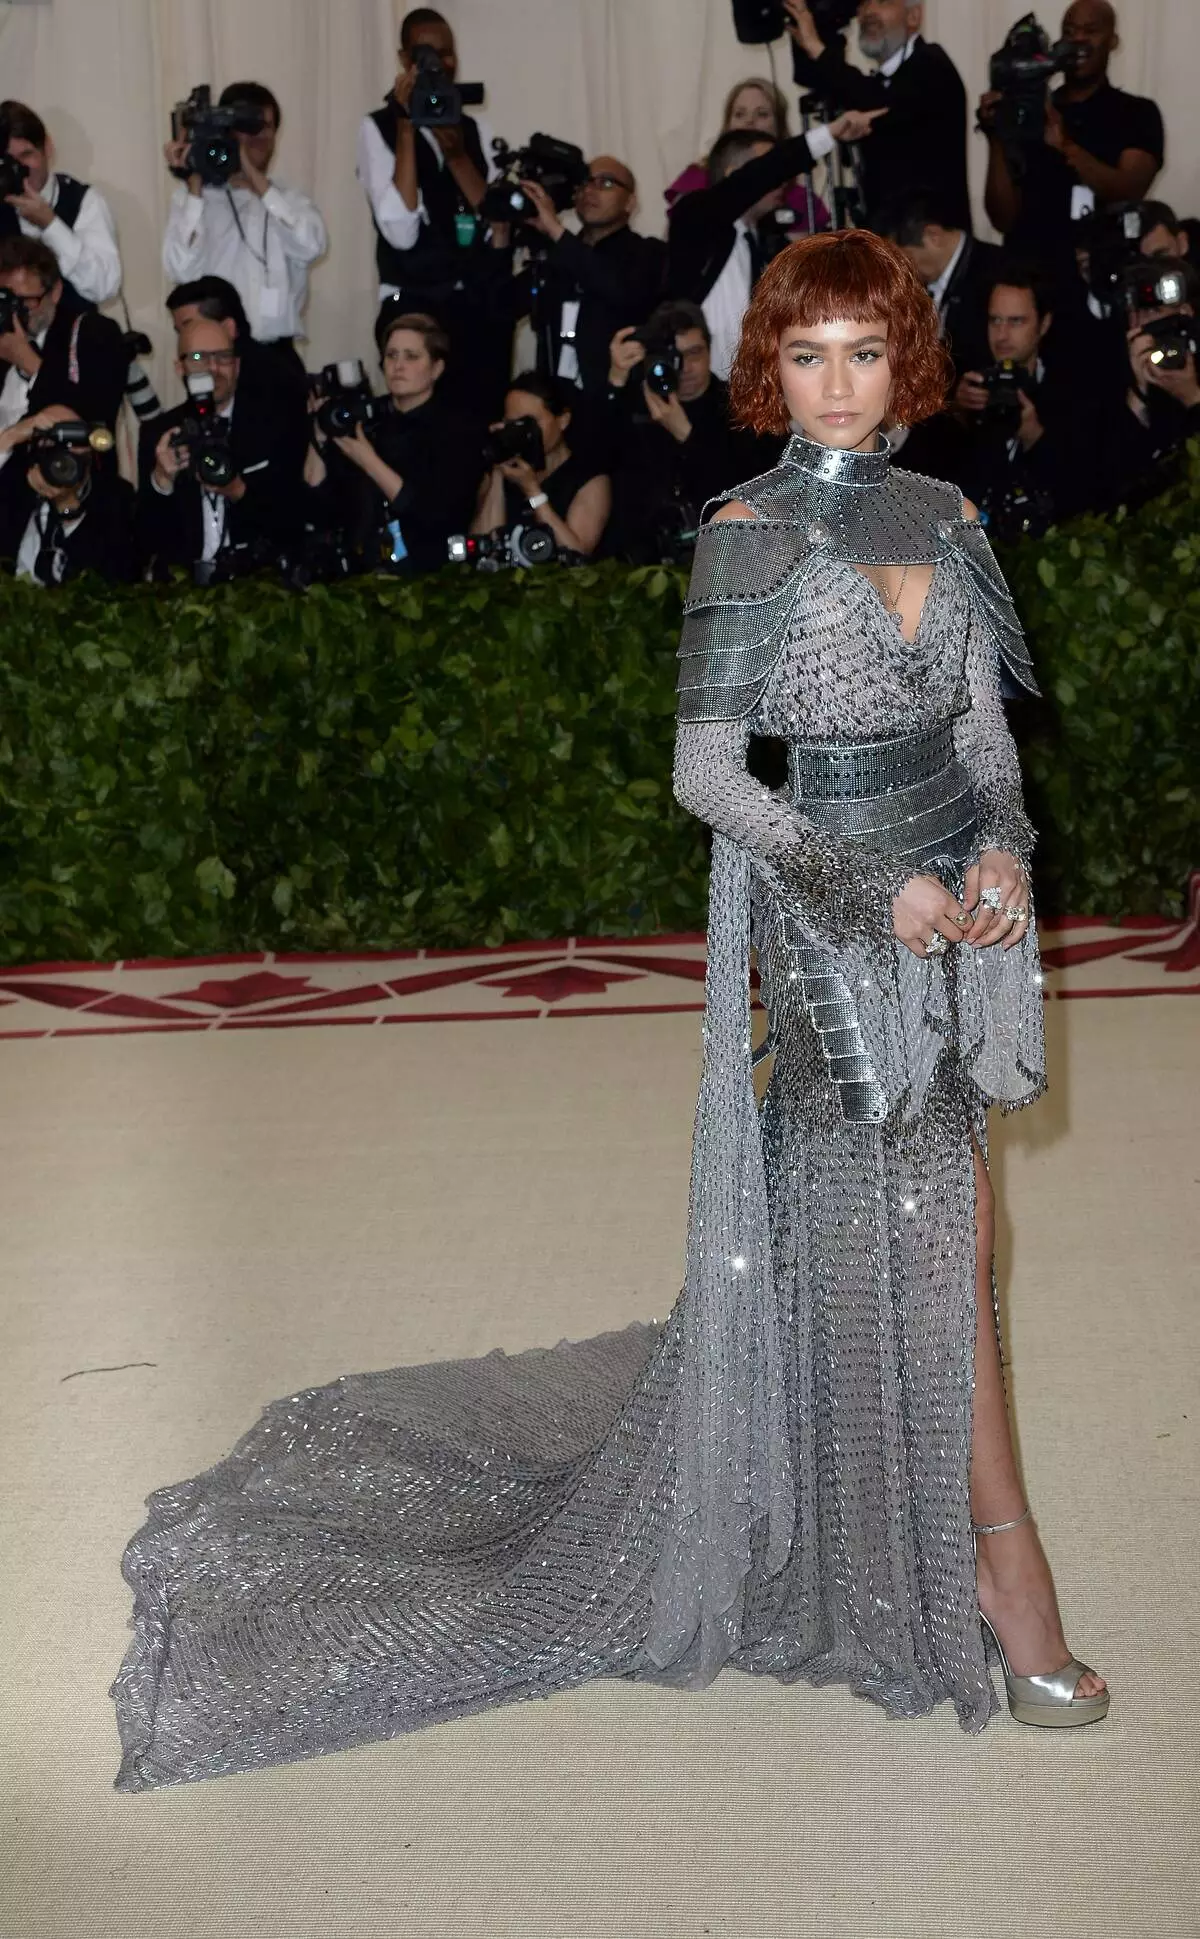 Mad outfits and Serena Williams as leading: What to expect from Met Gala 2019? 33077_5